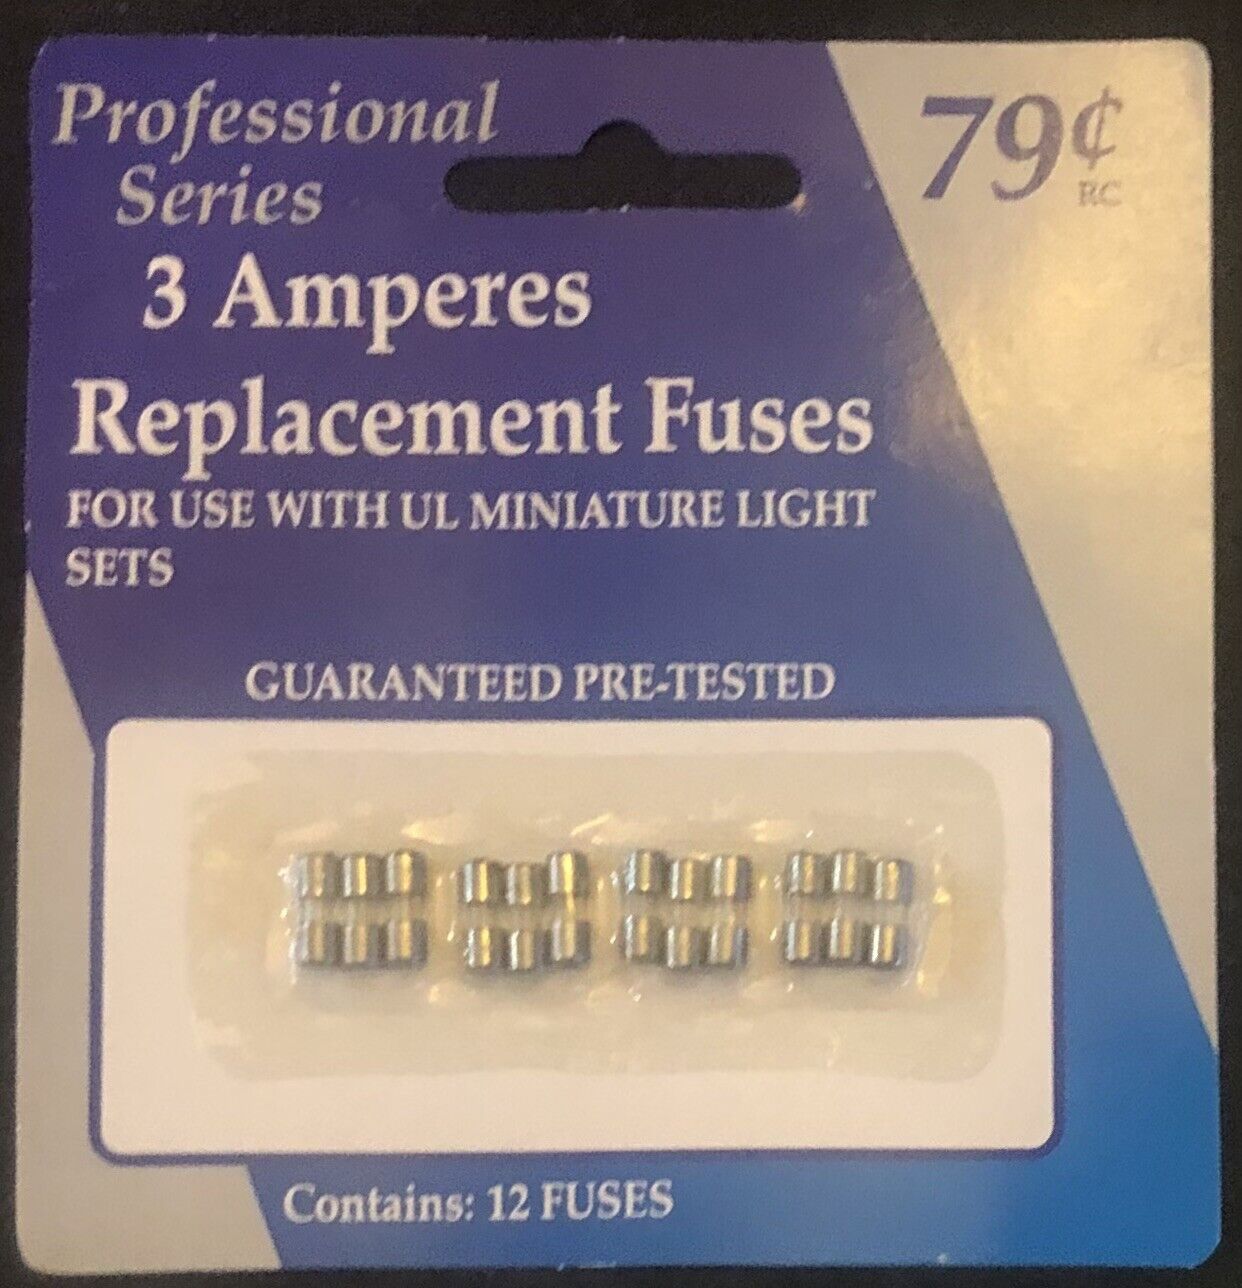 12 Fuses-Professional Series Replacement Fuses-3 Amperes-Pre-Tested